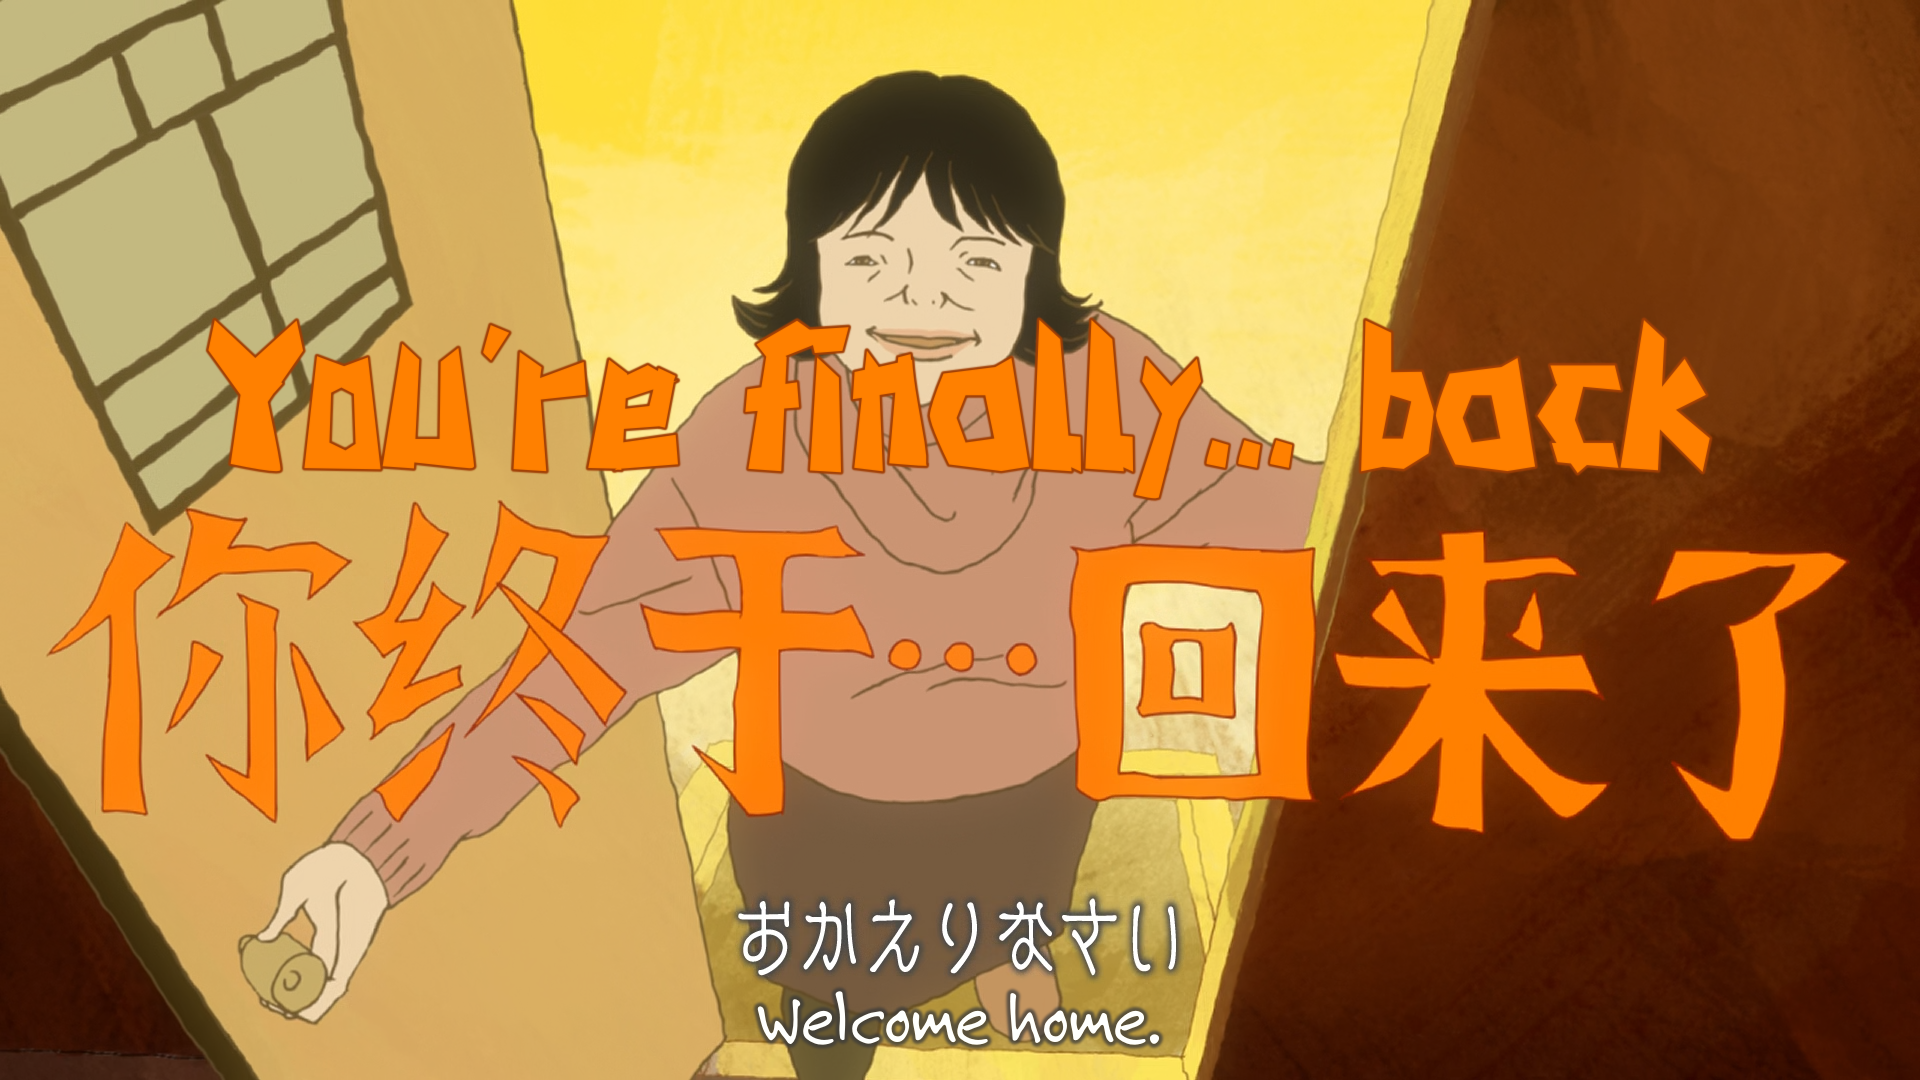 eli] Ping Pong The Animation subtitle project